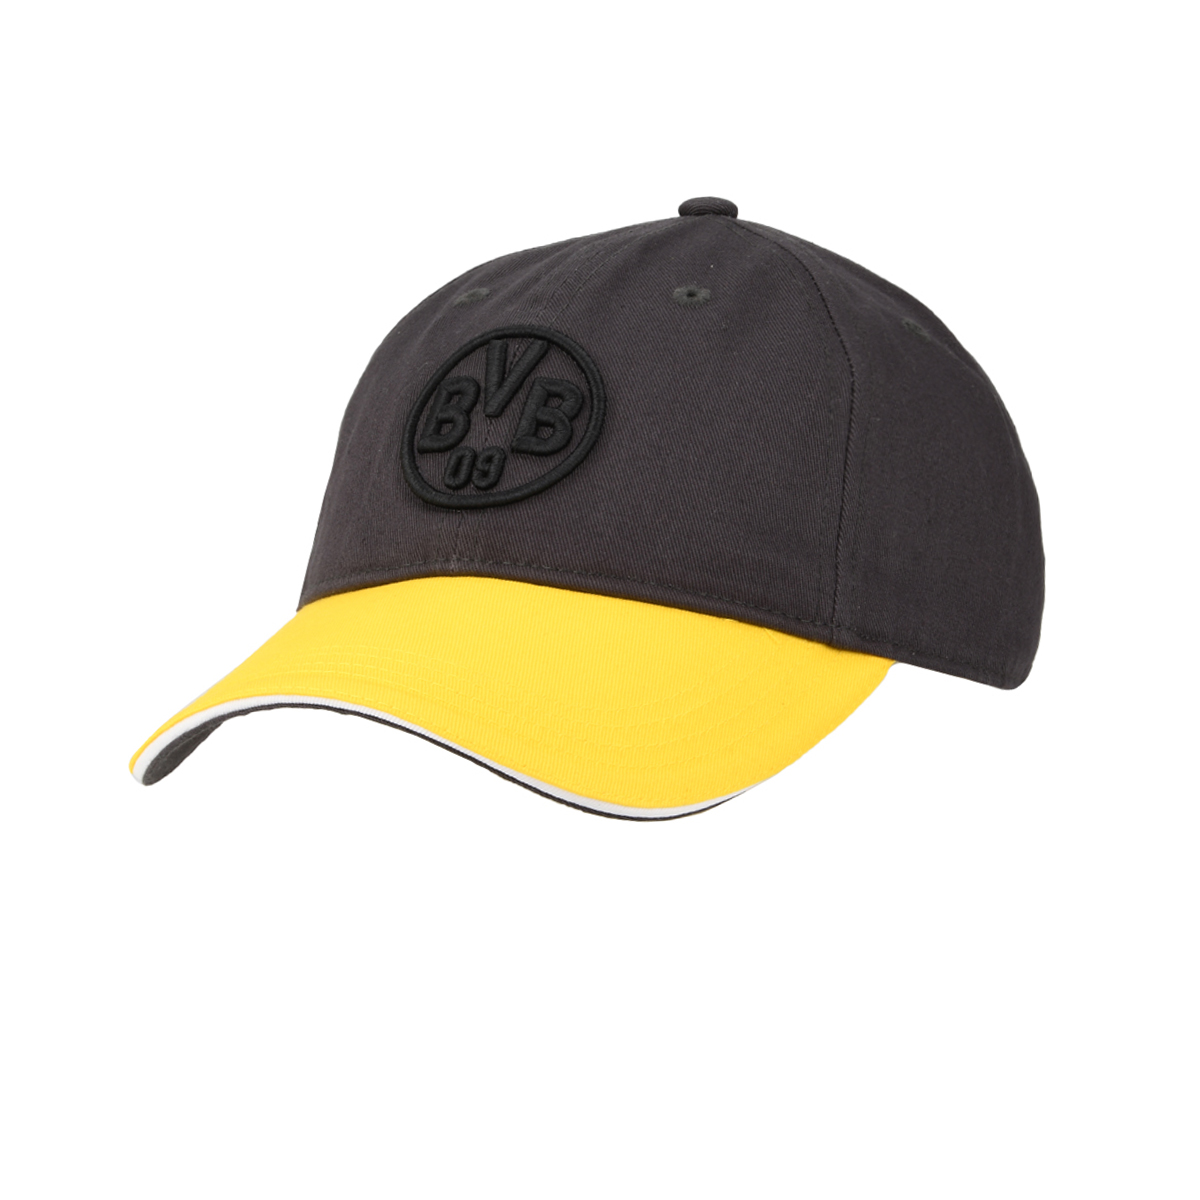 Gorra Puma Bvb Archive,  image number null